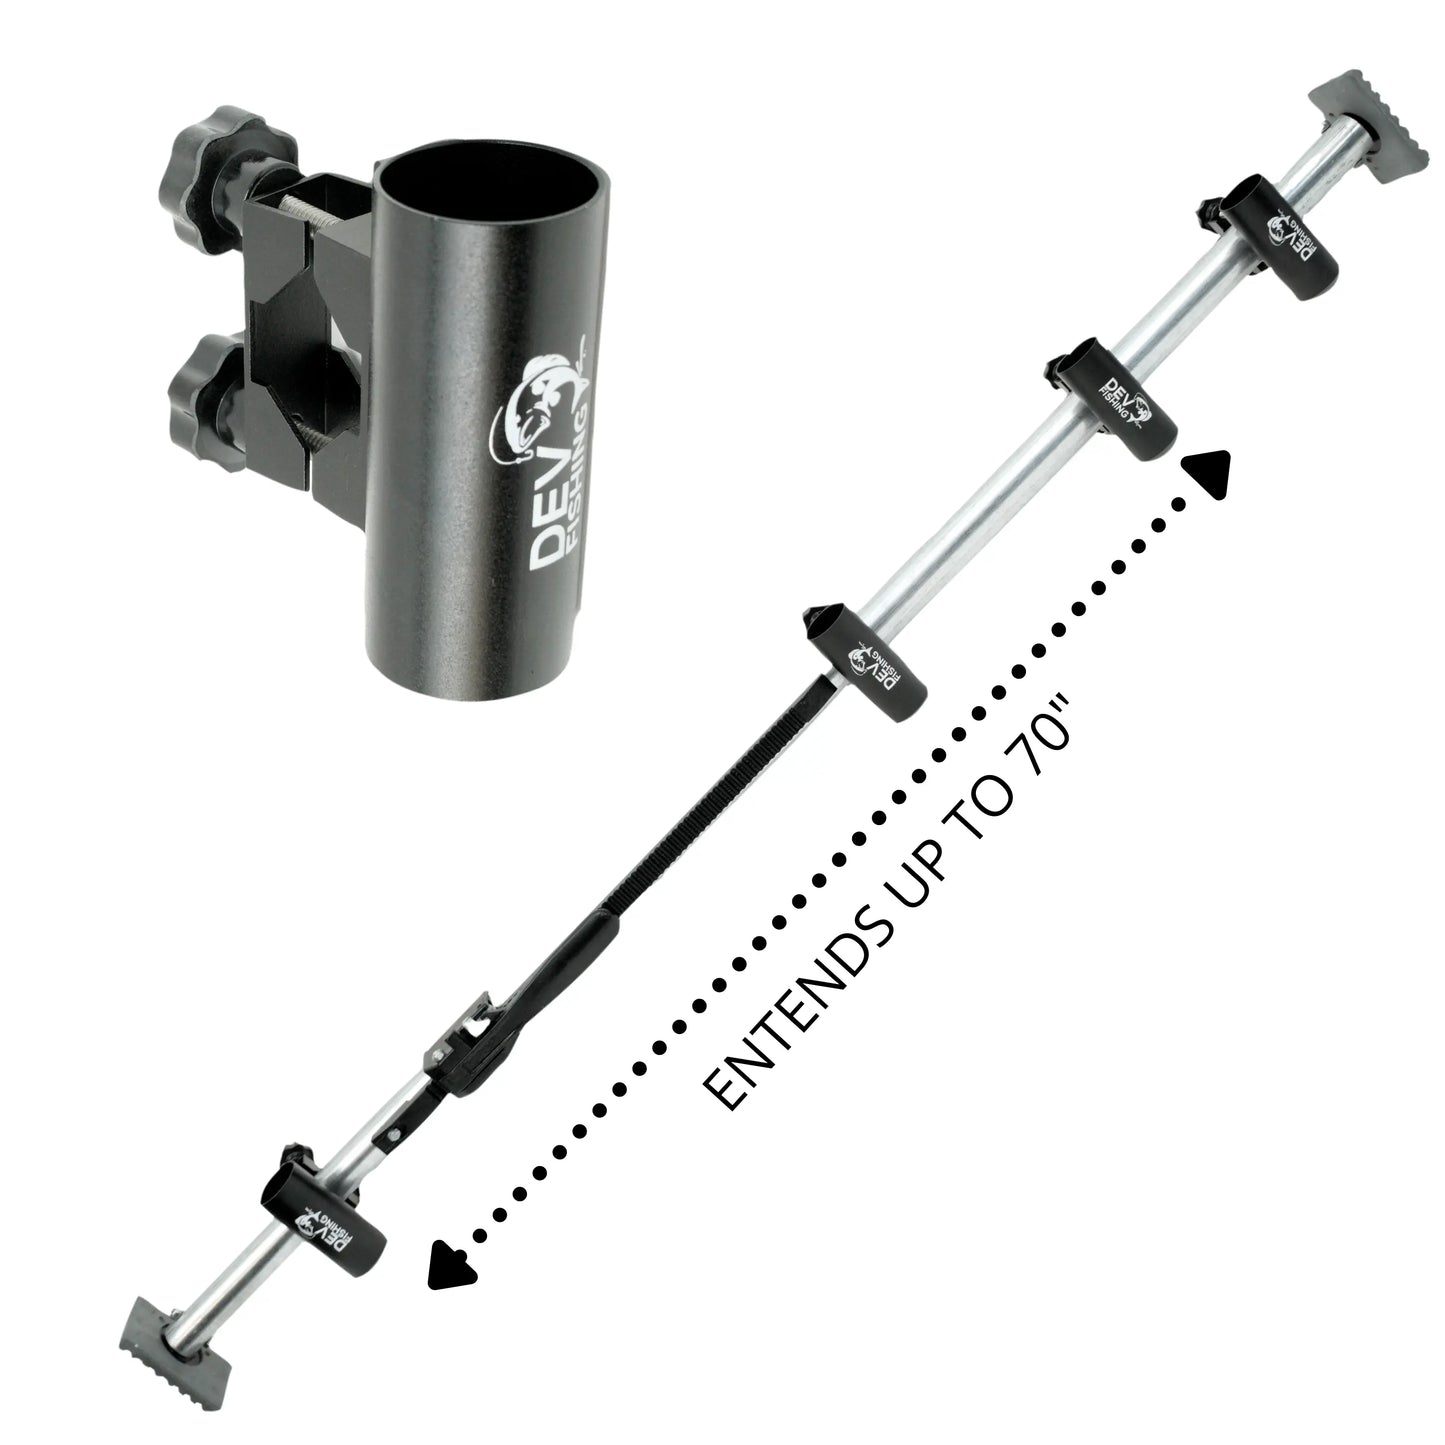 Dev Fishing RB-100 Extra Clamp Adjustable Pole Fishing Rod Holder :  : Sports & Outdoors